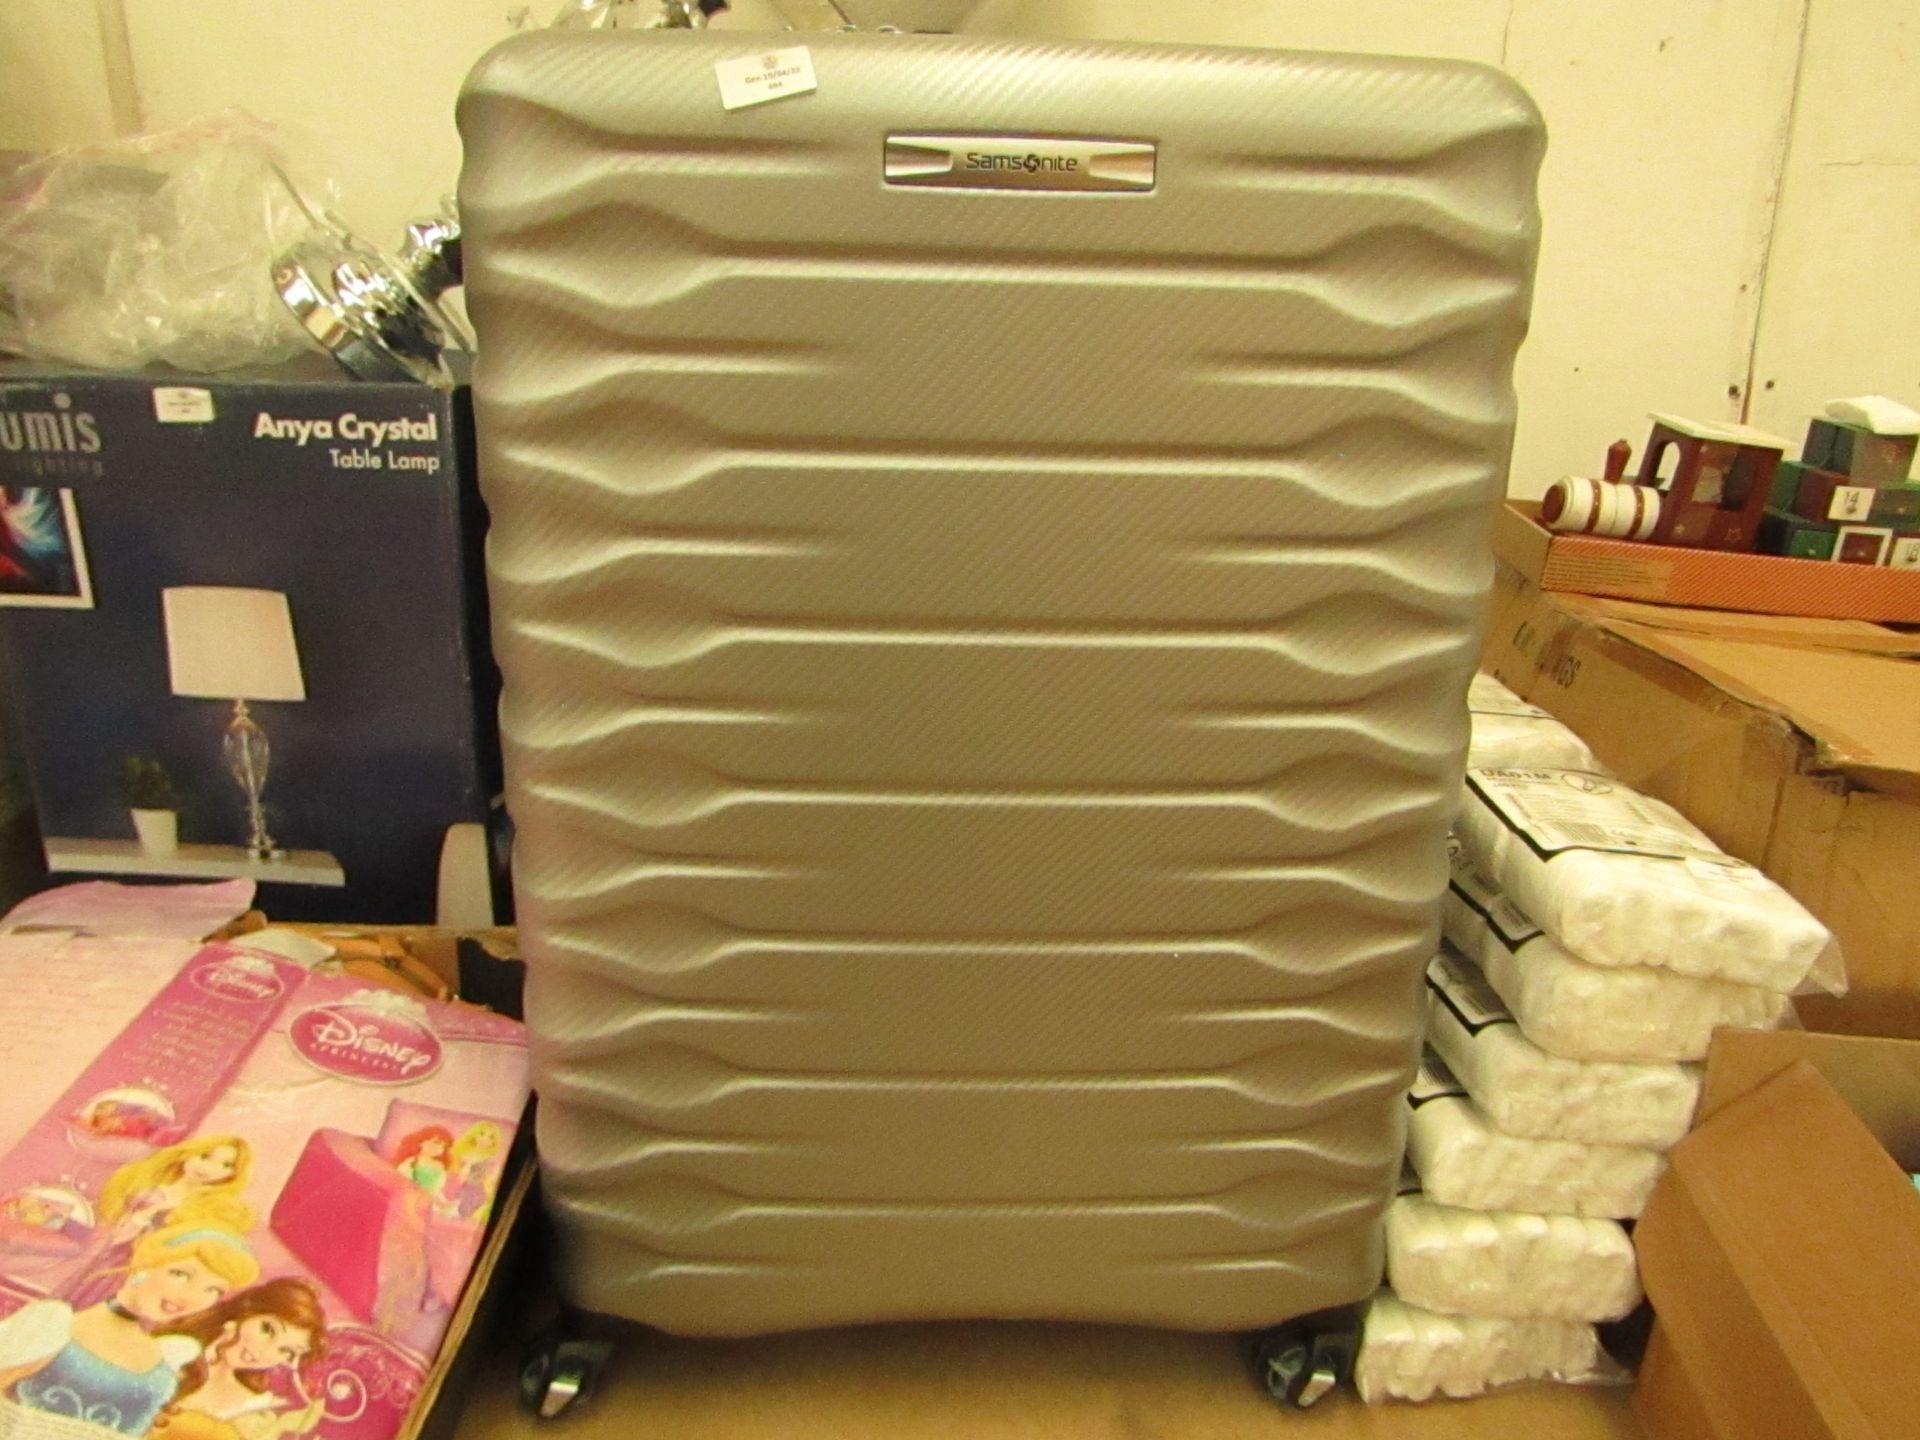 Samsonite - Prisma Hardside Spinner Case - Silver - Very Good Condition, No Visible Damages & Boxed.